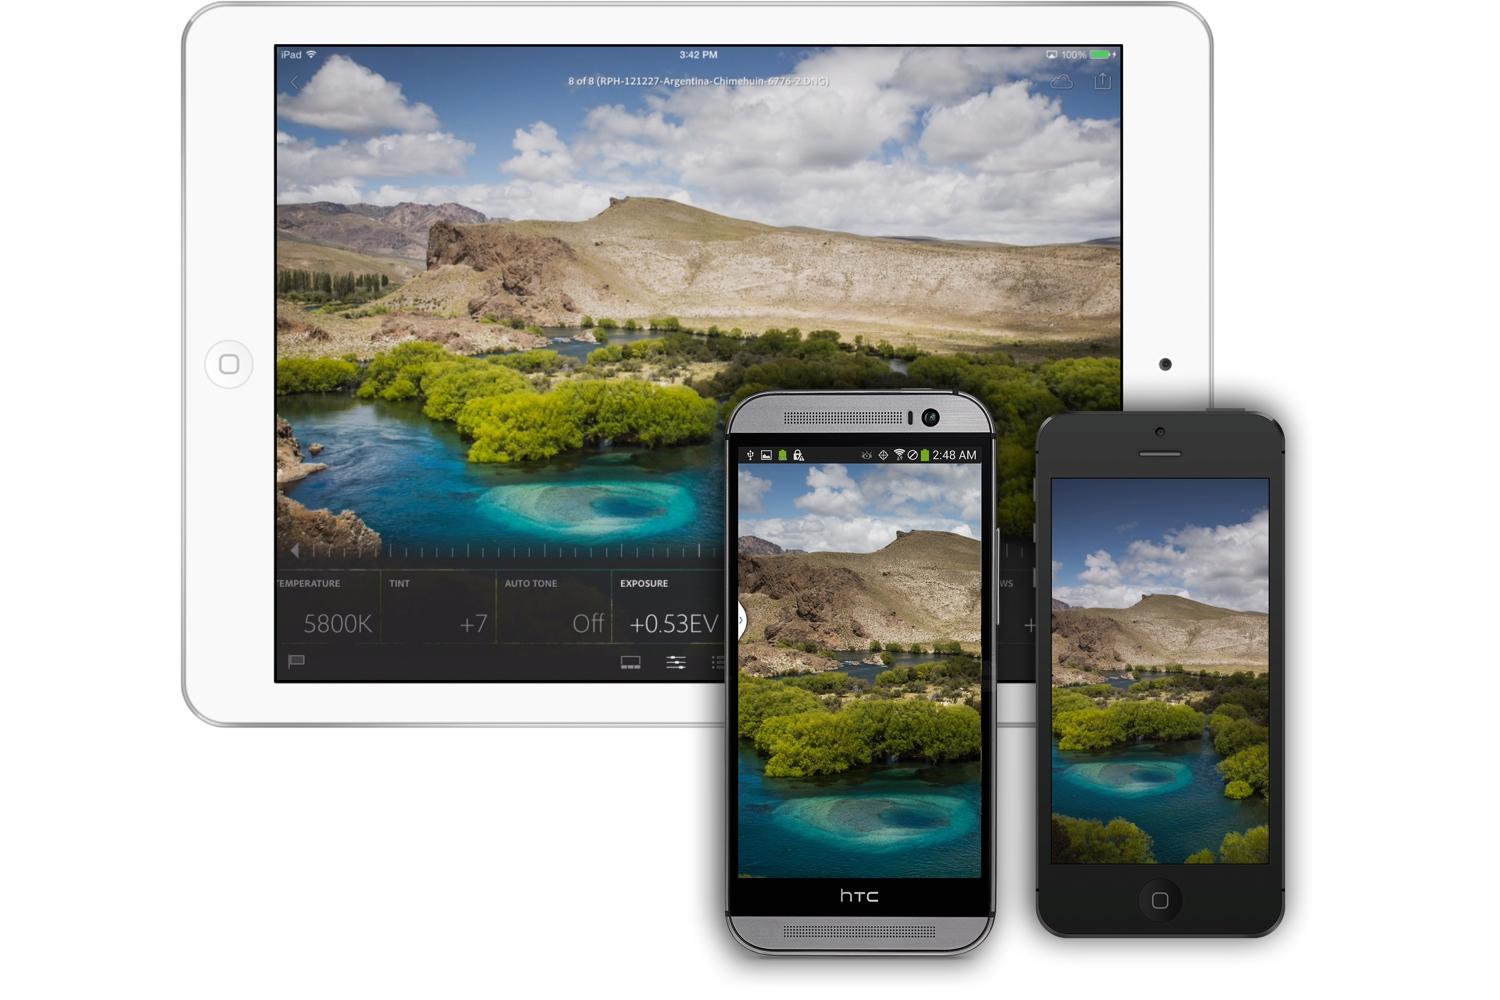 adobe lightroom mobiles photo editing tools now available android 3